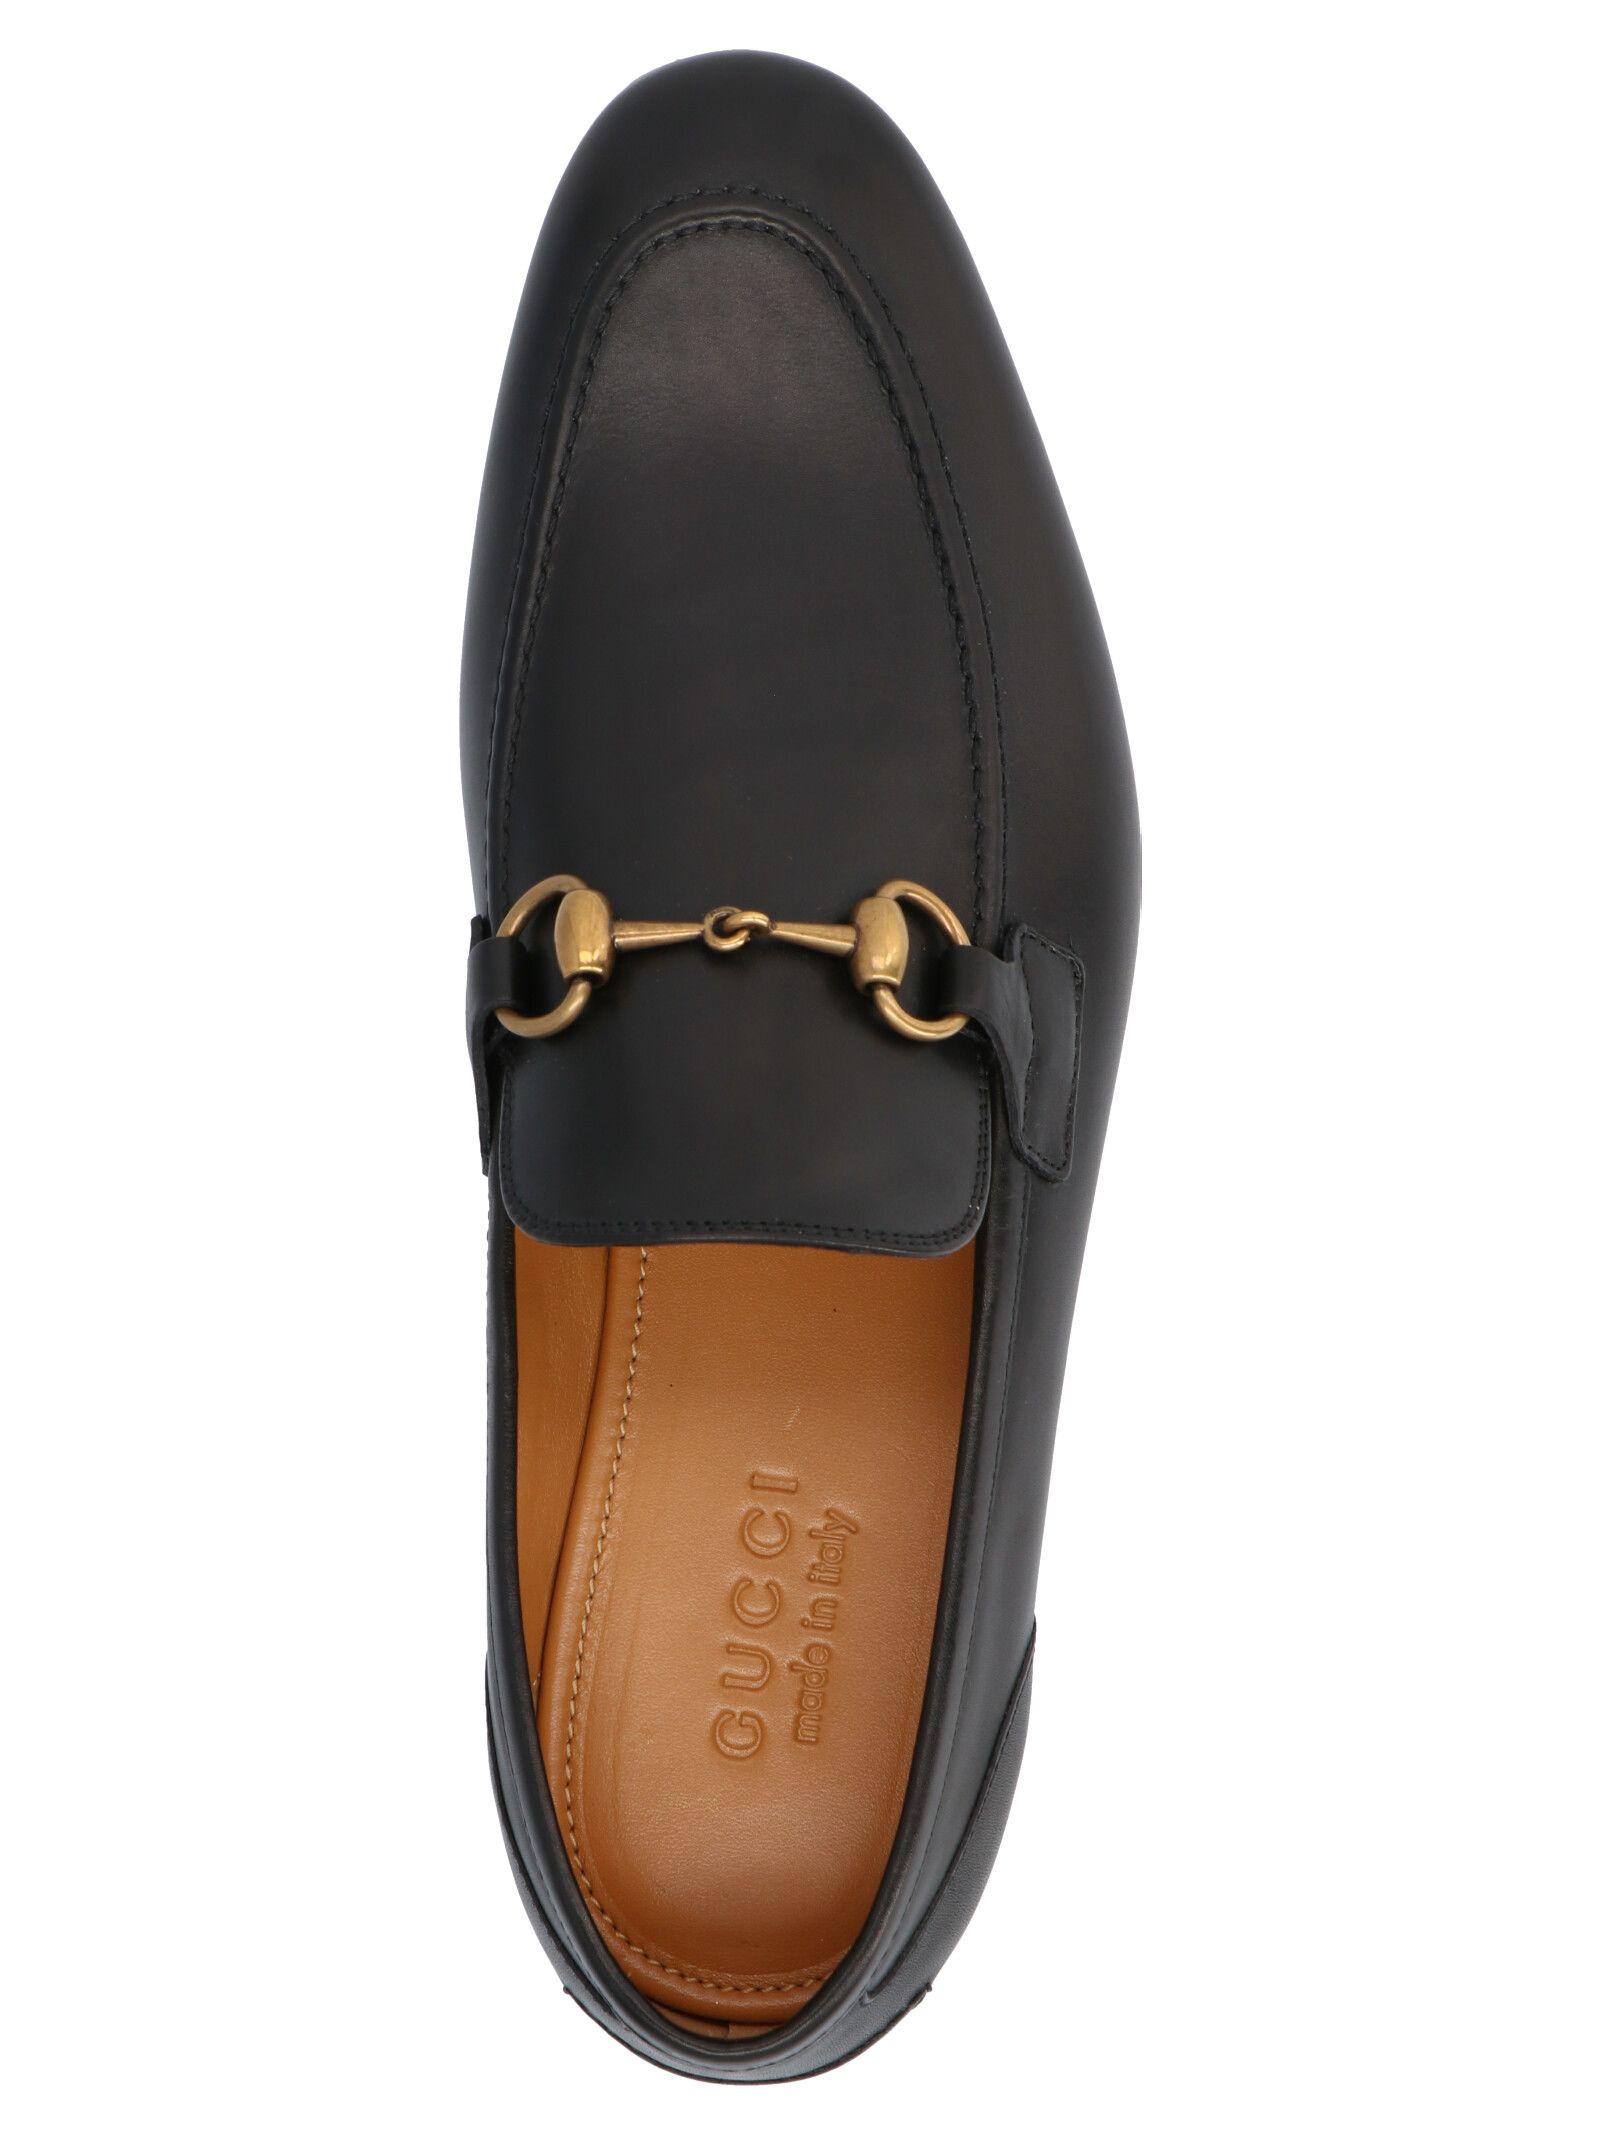 Gucci Loafers & Boat Shoes | italist, ALWAYS LIKE A SALE